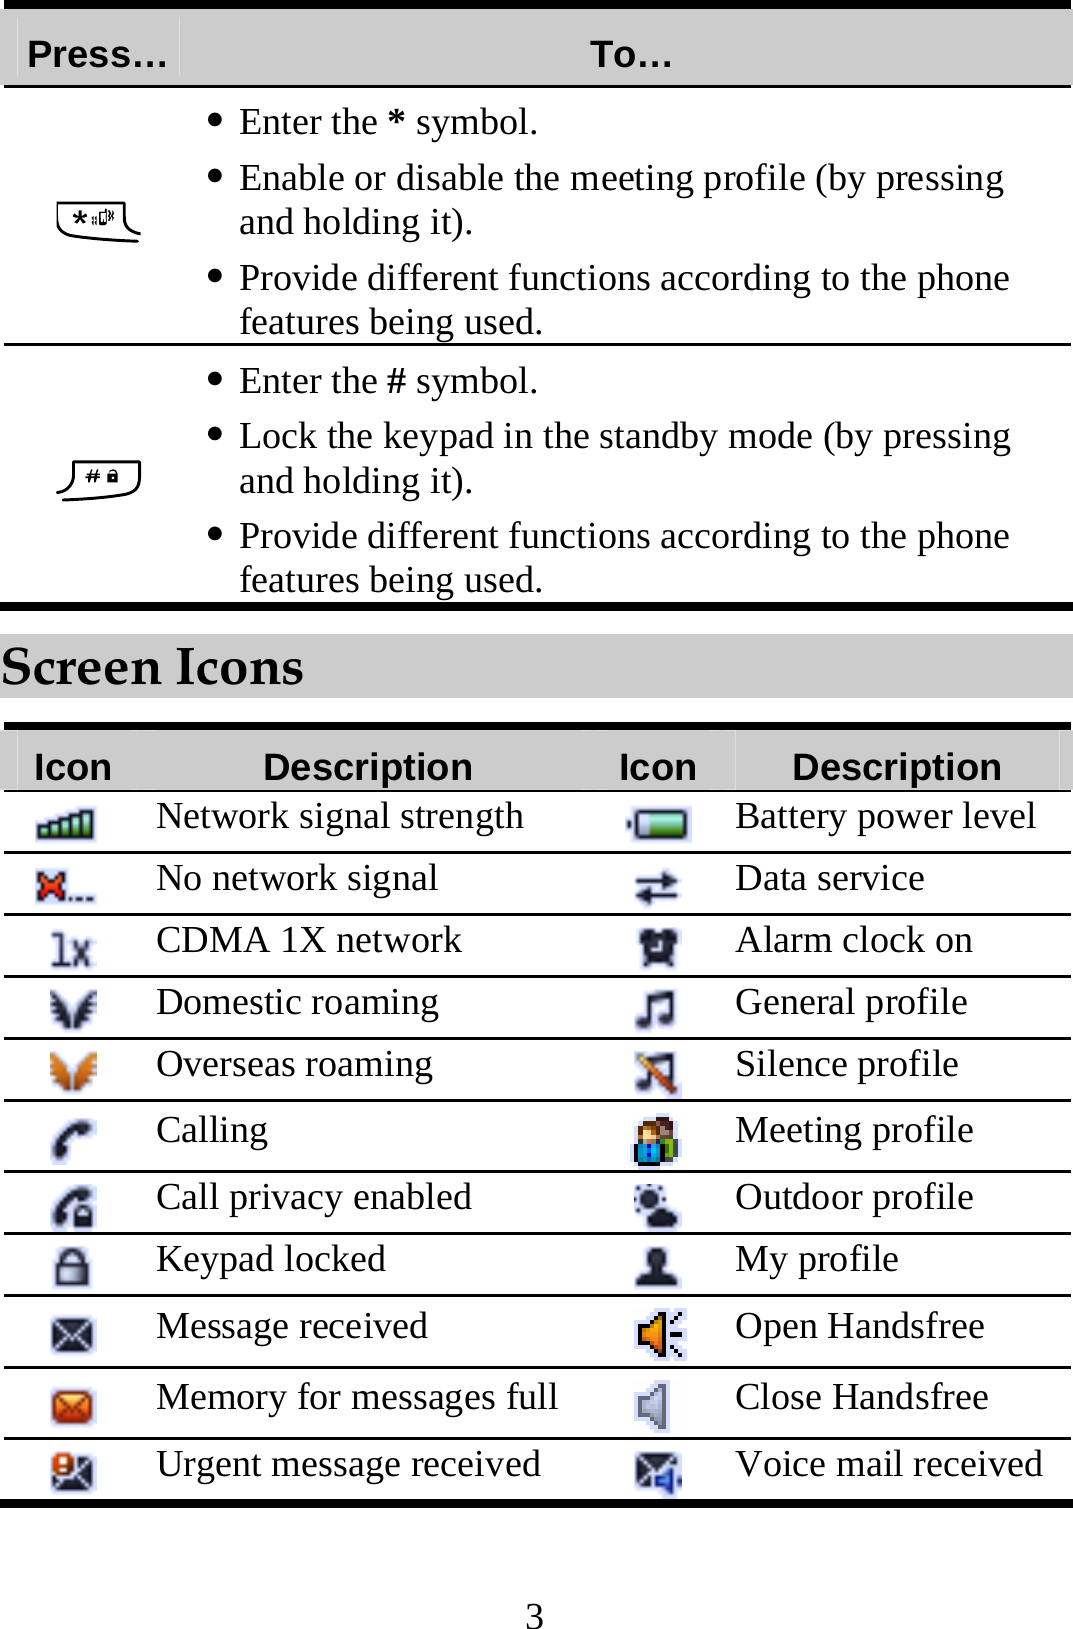 3 Press…  To…  z Enter the * symbol. z Enable or disable the meeting profile (by pressing and holding it). z Provide different functions according to the phone features being used.  z Enter the # symbol. z Lock the keypad in the standby mode (by pressing and holding it). z Provide different functions according to the phone features being used. Screen Icons Icon  Description  Icon Description  Network signal strength  Battery power level No network signal   Data service  CDMA 1X network   Alarm clock on  Domestic roaming   General profile  Overseas roaming   Silence profile  Calling   Meeting profile  Call privacy enabled   Outdoor profile  Keypad locked   My profile  Message received   Open Handsfree  Memory for messages full  Close Handsfree  Urgent message received   Voice mail received